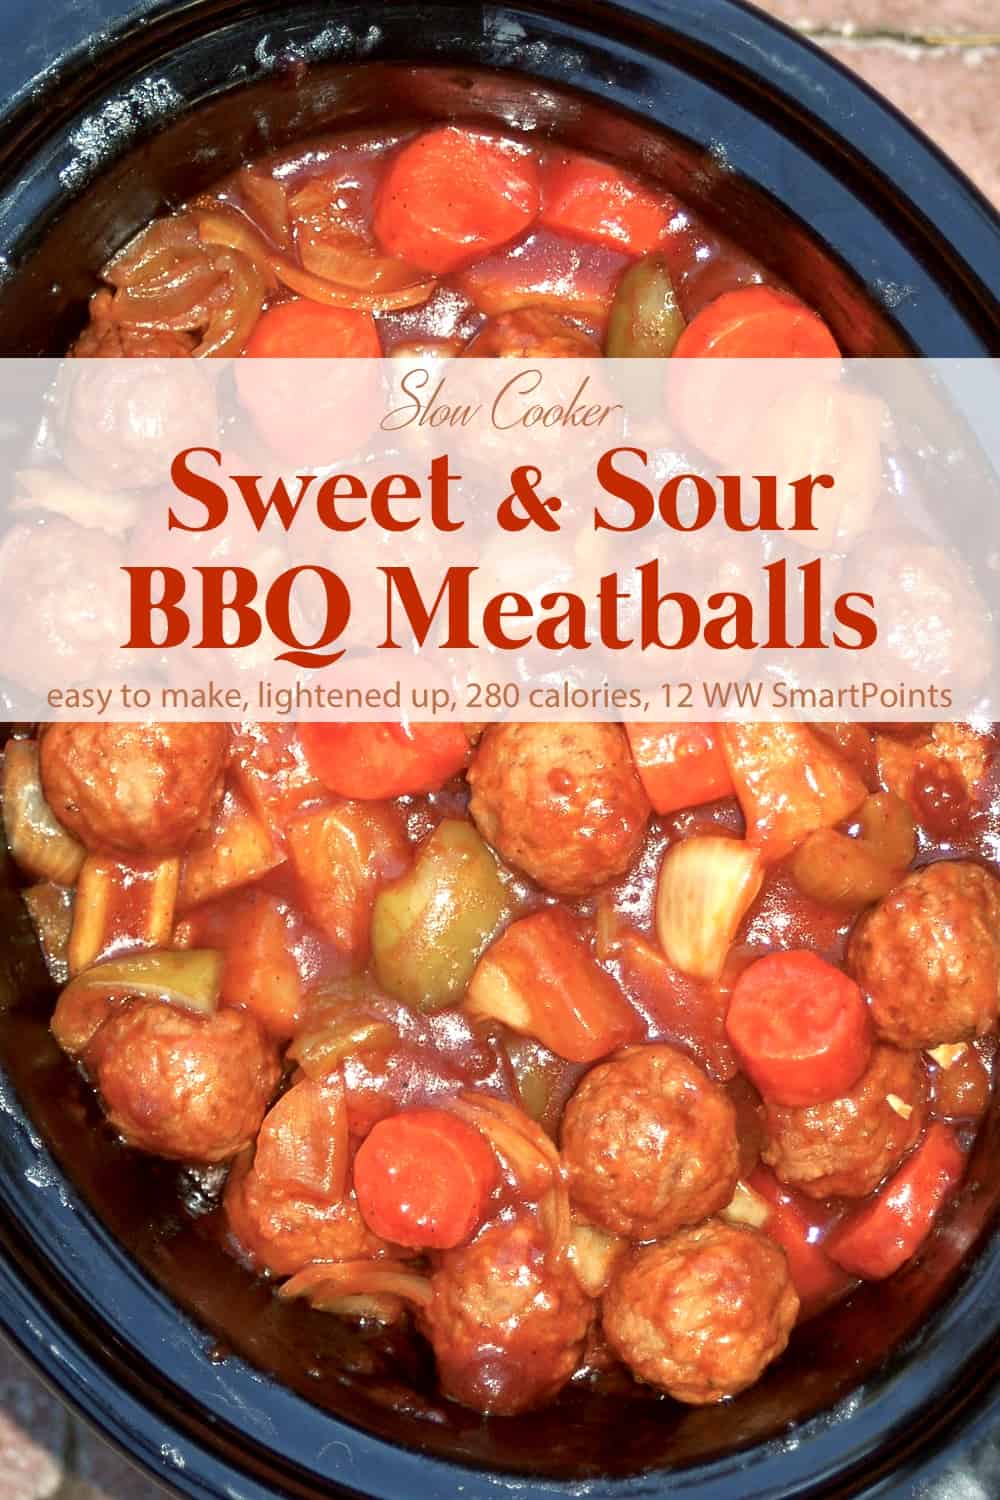 Crock pot with batch of sweet and sour bbq meatballs.